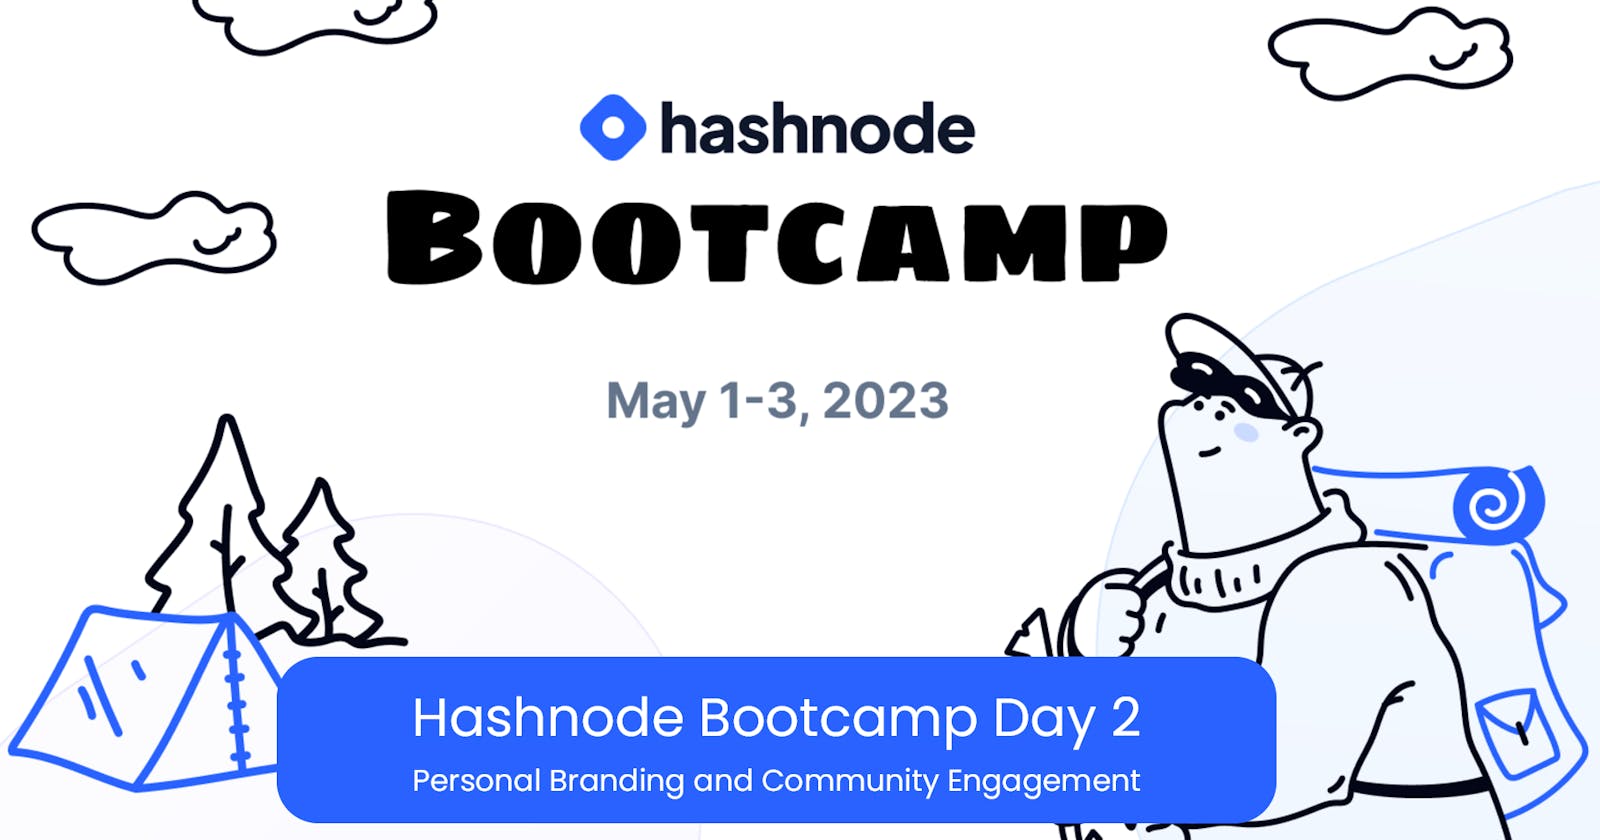 Hashnode Bootcamp Day 2: Personal Branding and Community Engagement